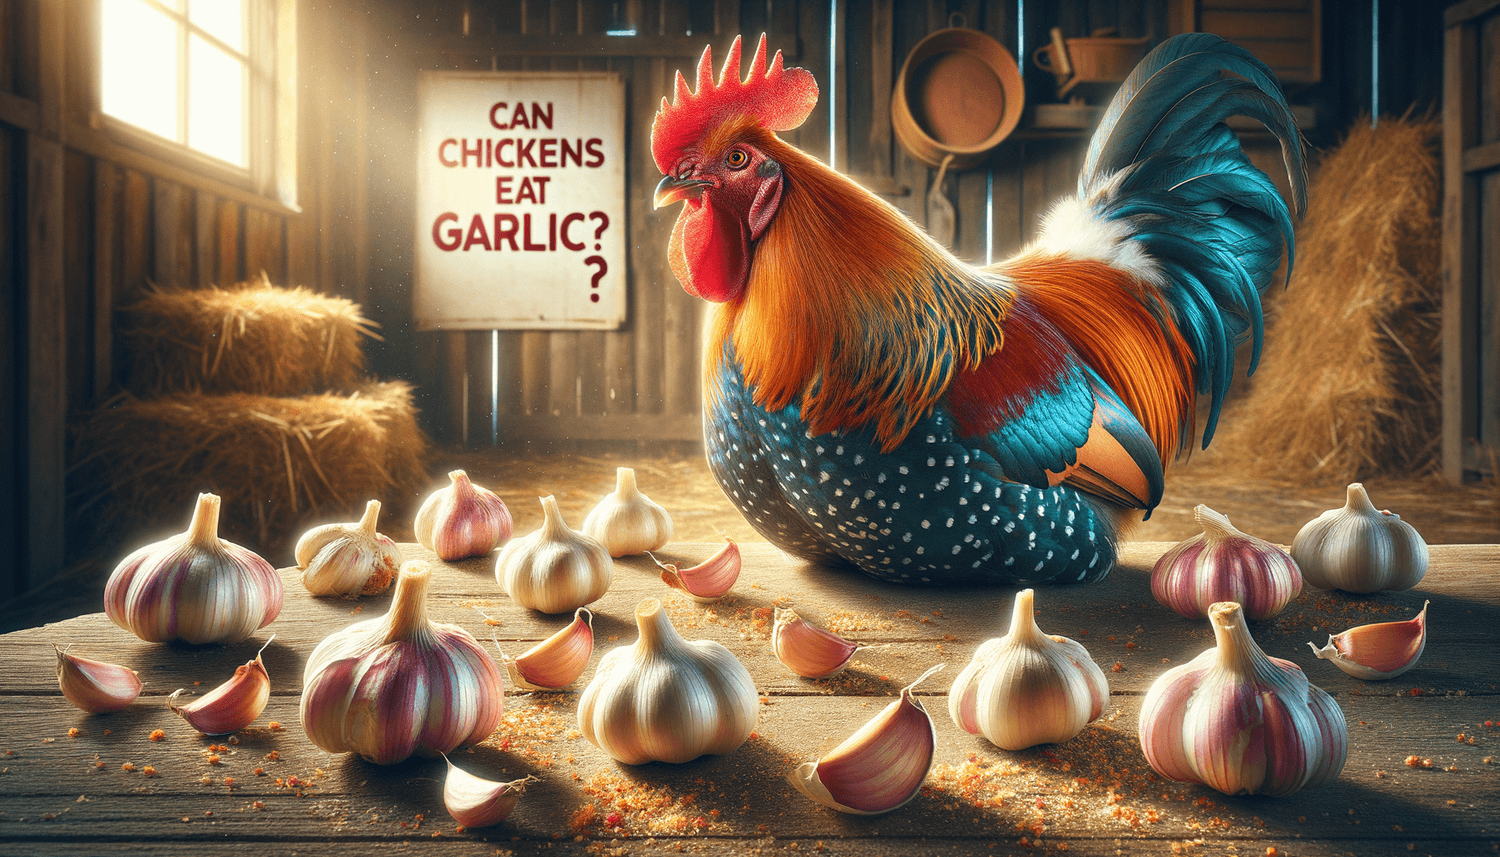 Can Chickens Eat Garlic?